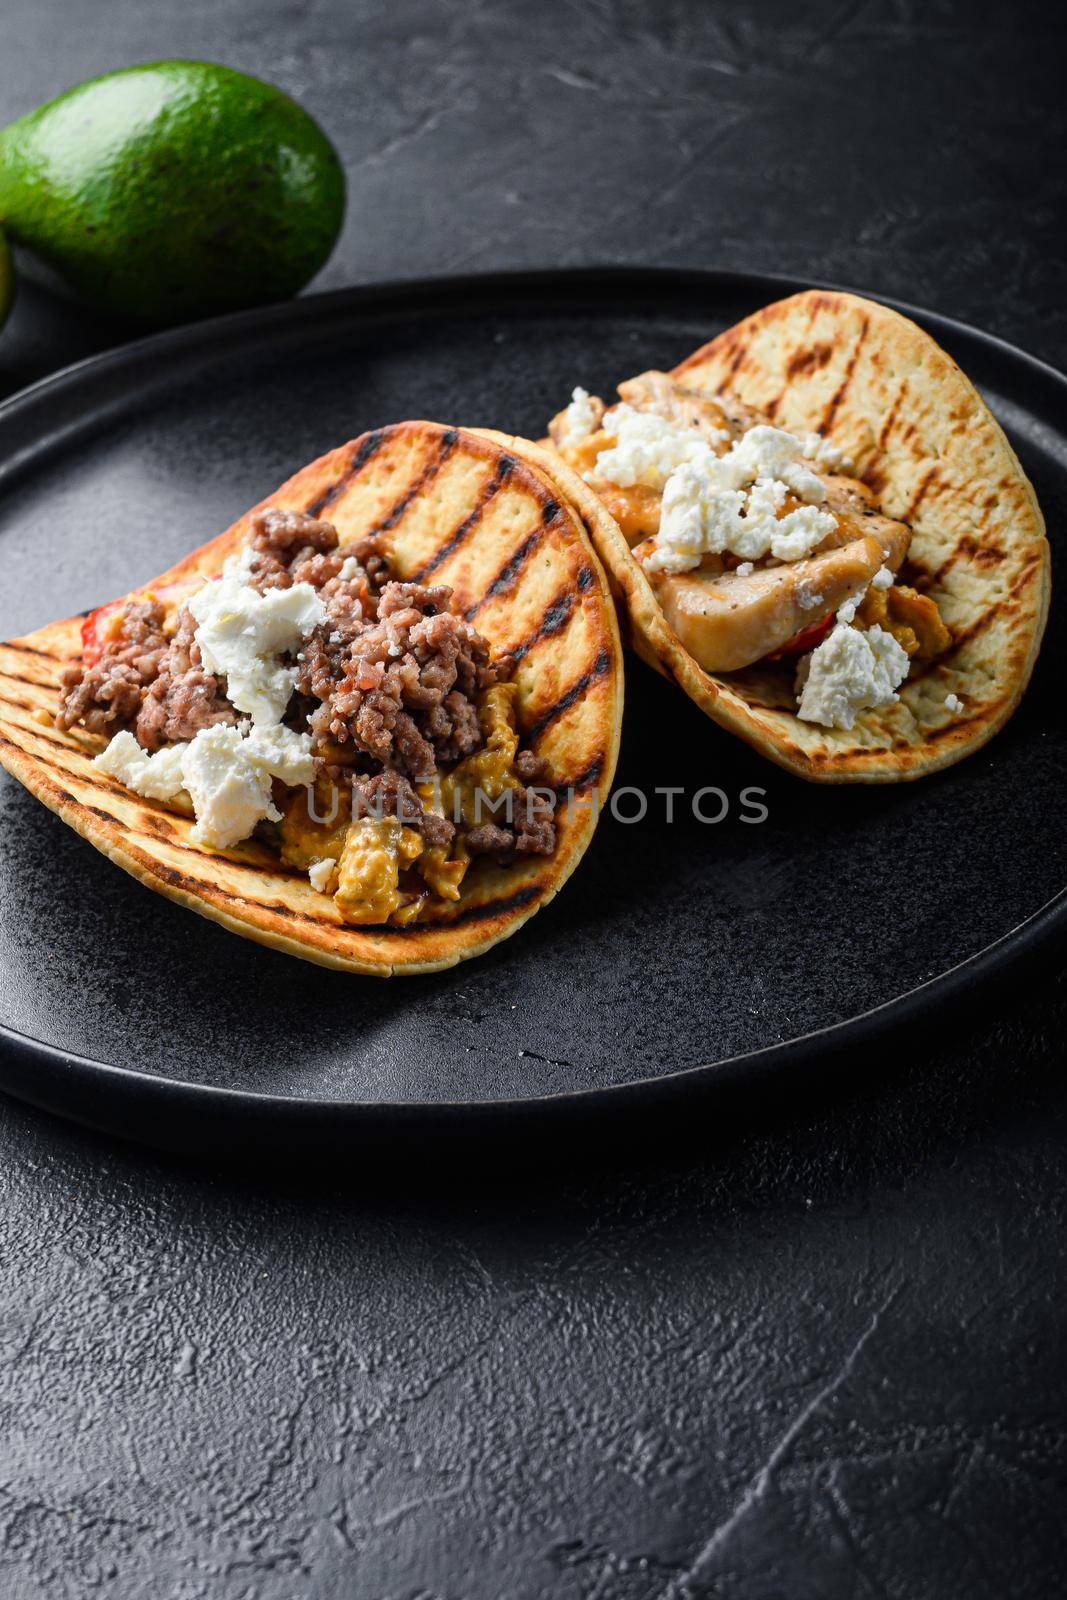 Mexican tacos with vegetables and beeaf and chicken meat on black round plate over textured black background, side view, selective focus vertical by Ilianesolenyi